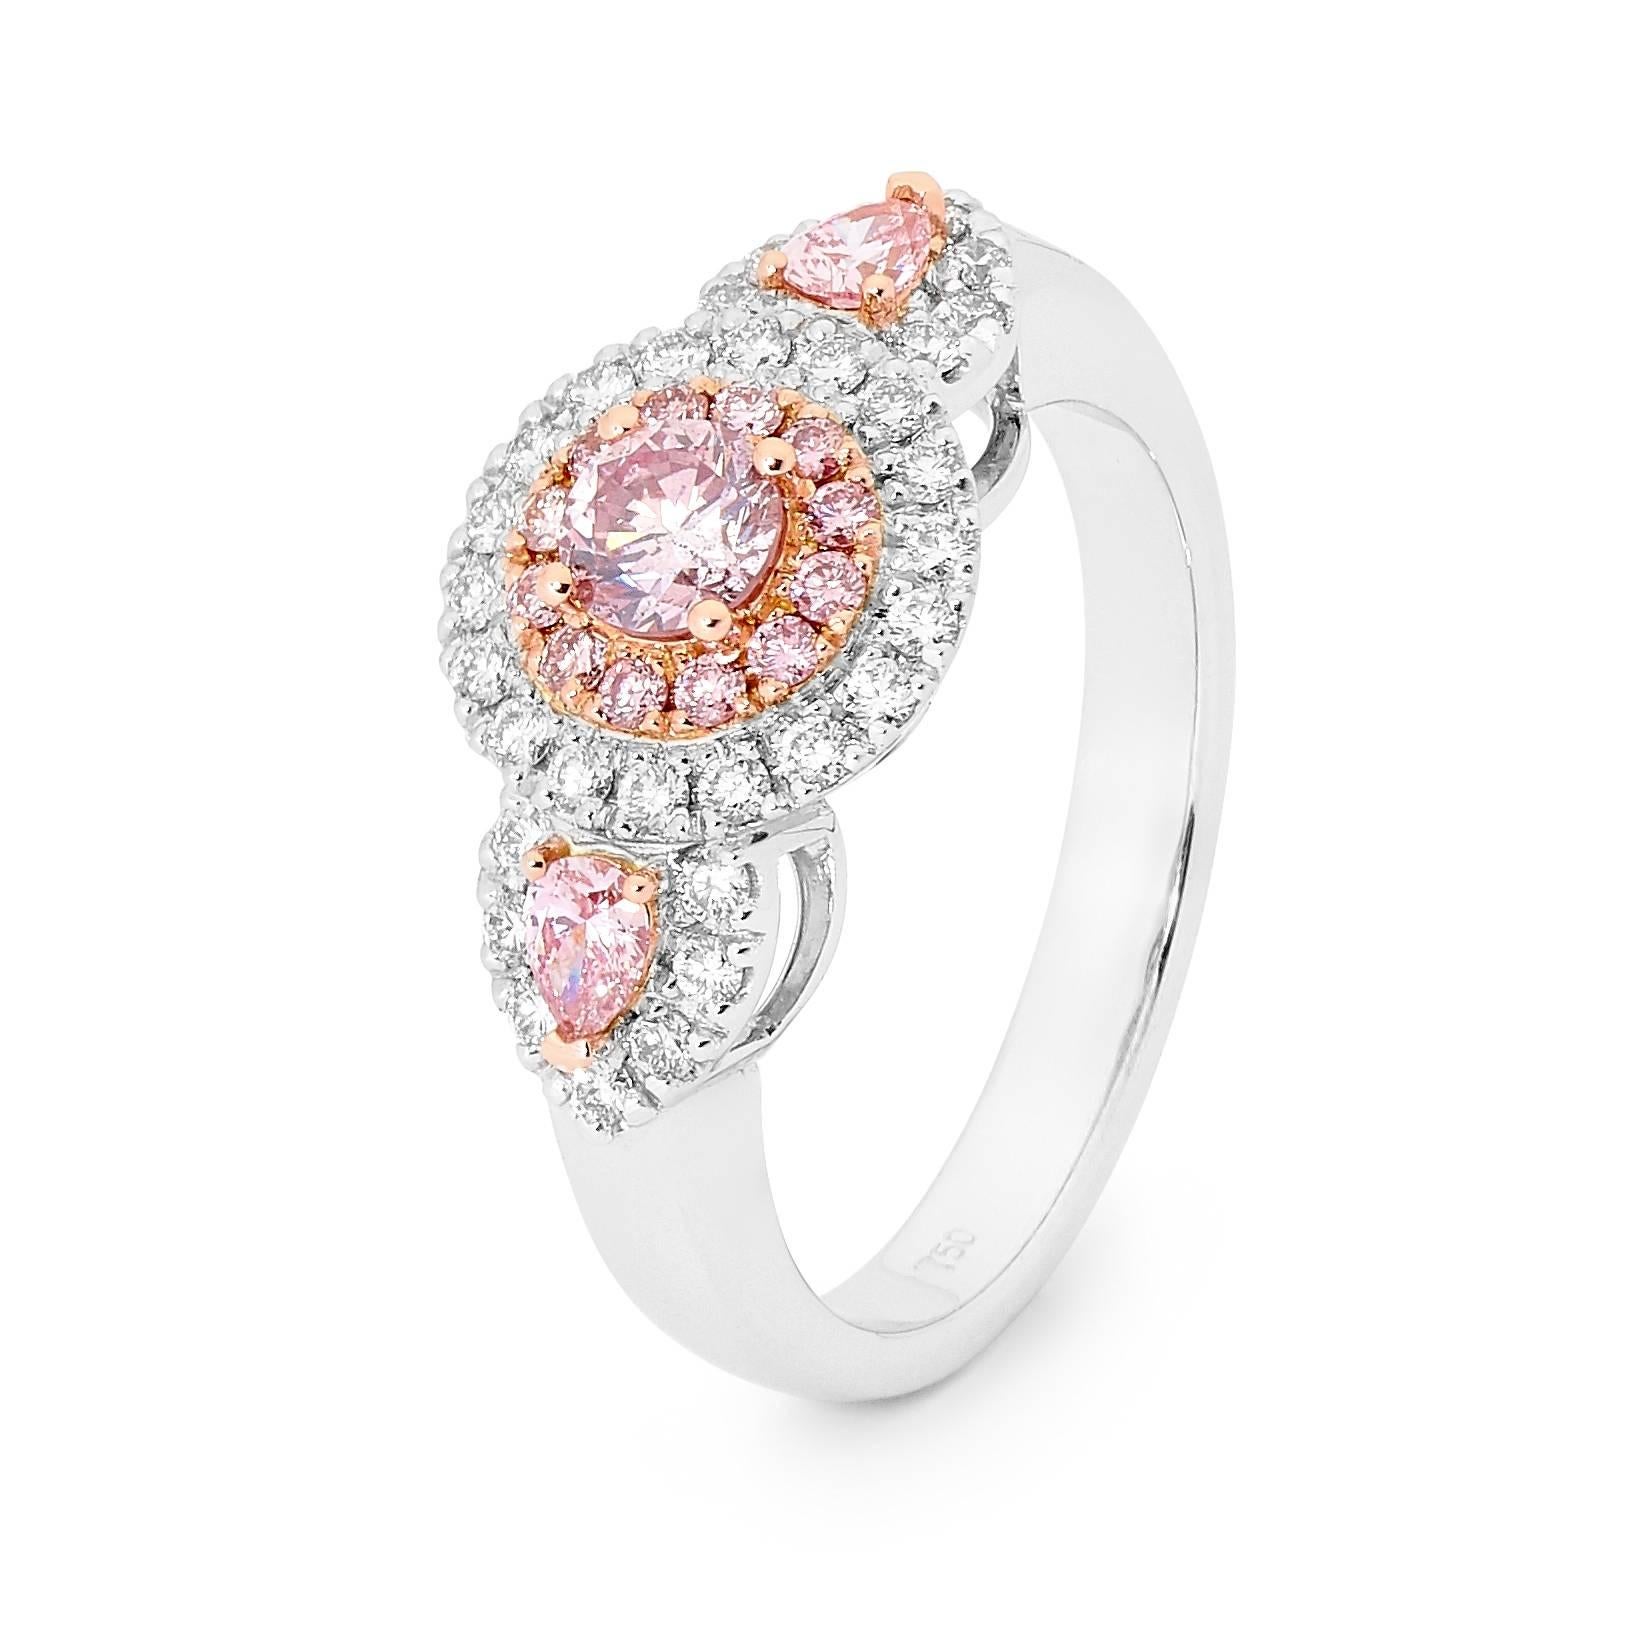 Two tone 18 carat white gold and rose gold 3 stone diamond ring. The ring consists of 1 round cut pink diamond weighing 0.29ct with a 7P colour and P2 clarity from Argyle lot #337500, and 2 pear shaped pink diamonds totalling 0.17ct with a 7P colour